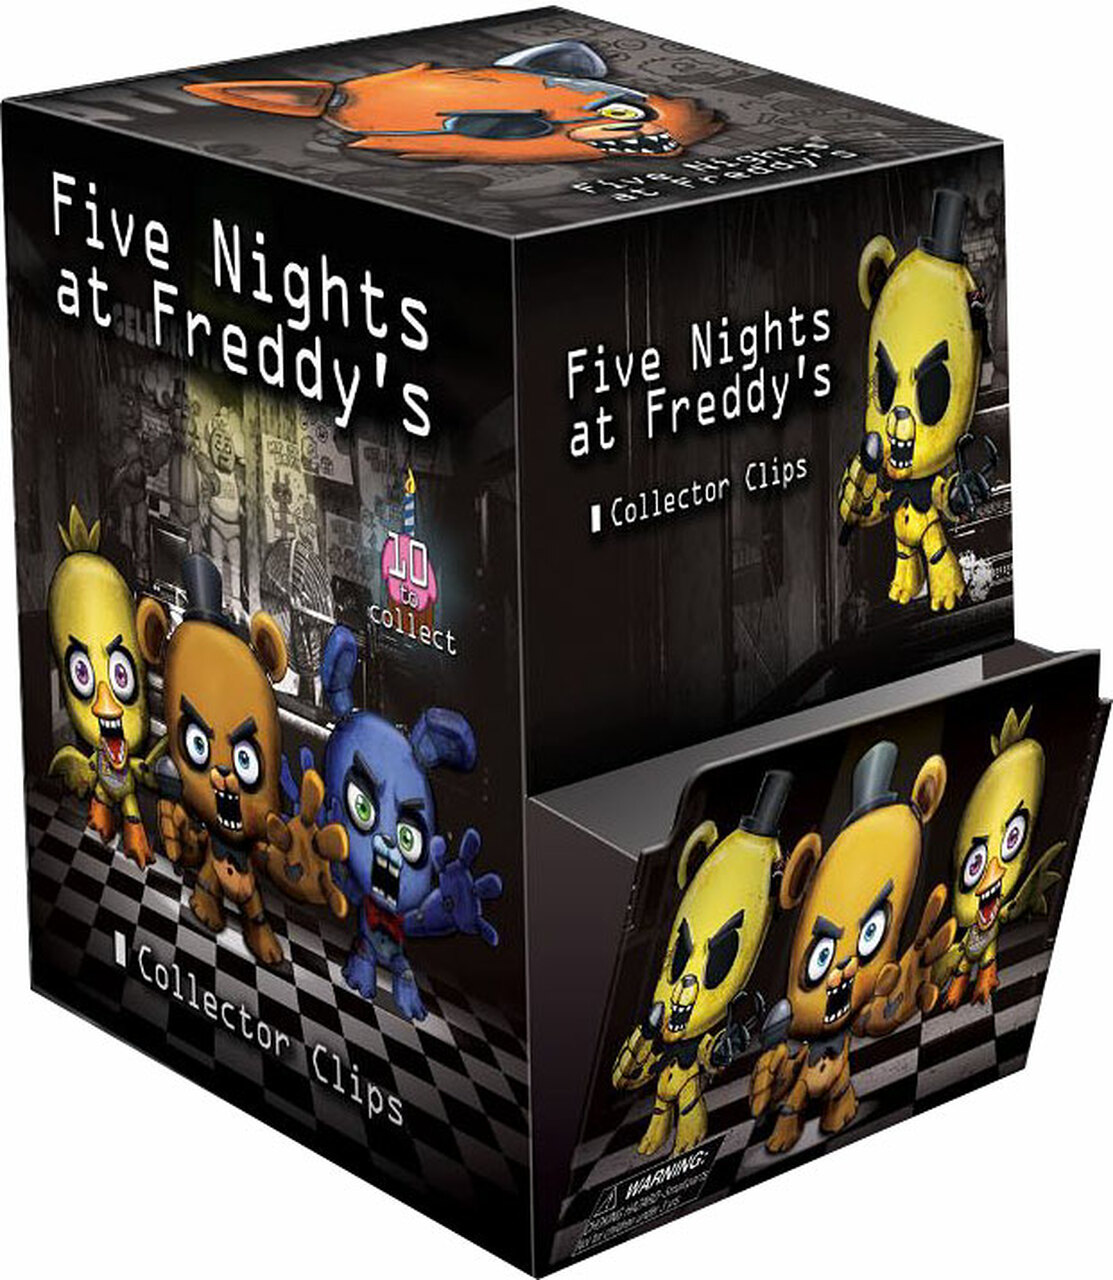 https://static.wikia.nocookie.net/freddy-fazbears-pizza/images/1/15/Collector_Clips_Series_1_Box_art.jpg/revision/latest?cb=20220122002424